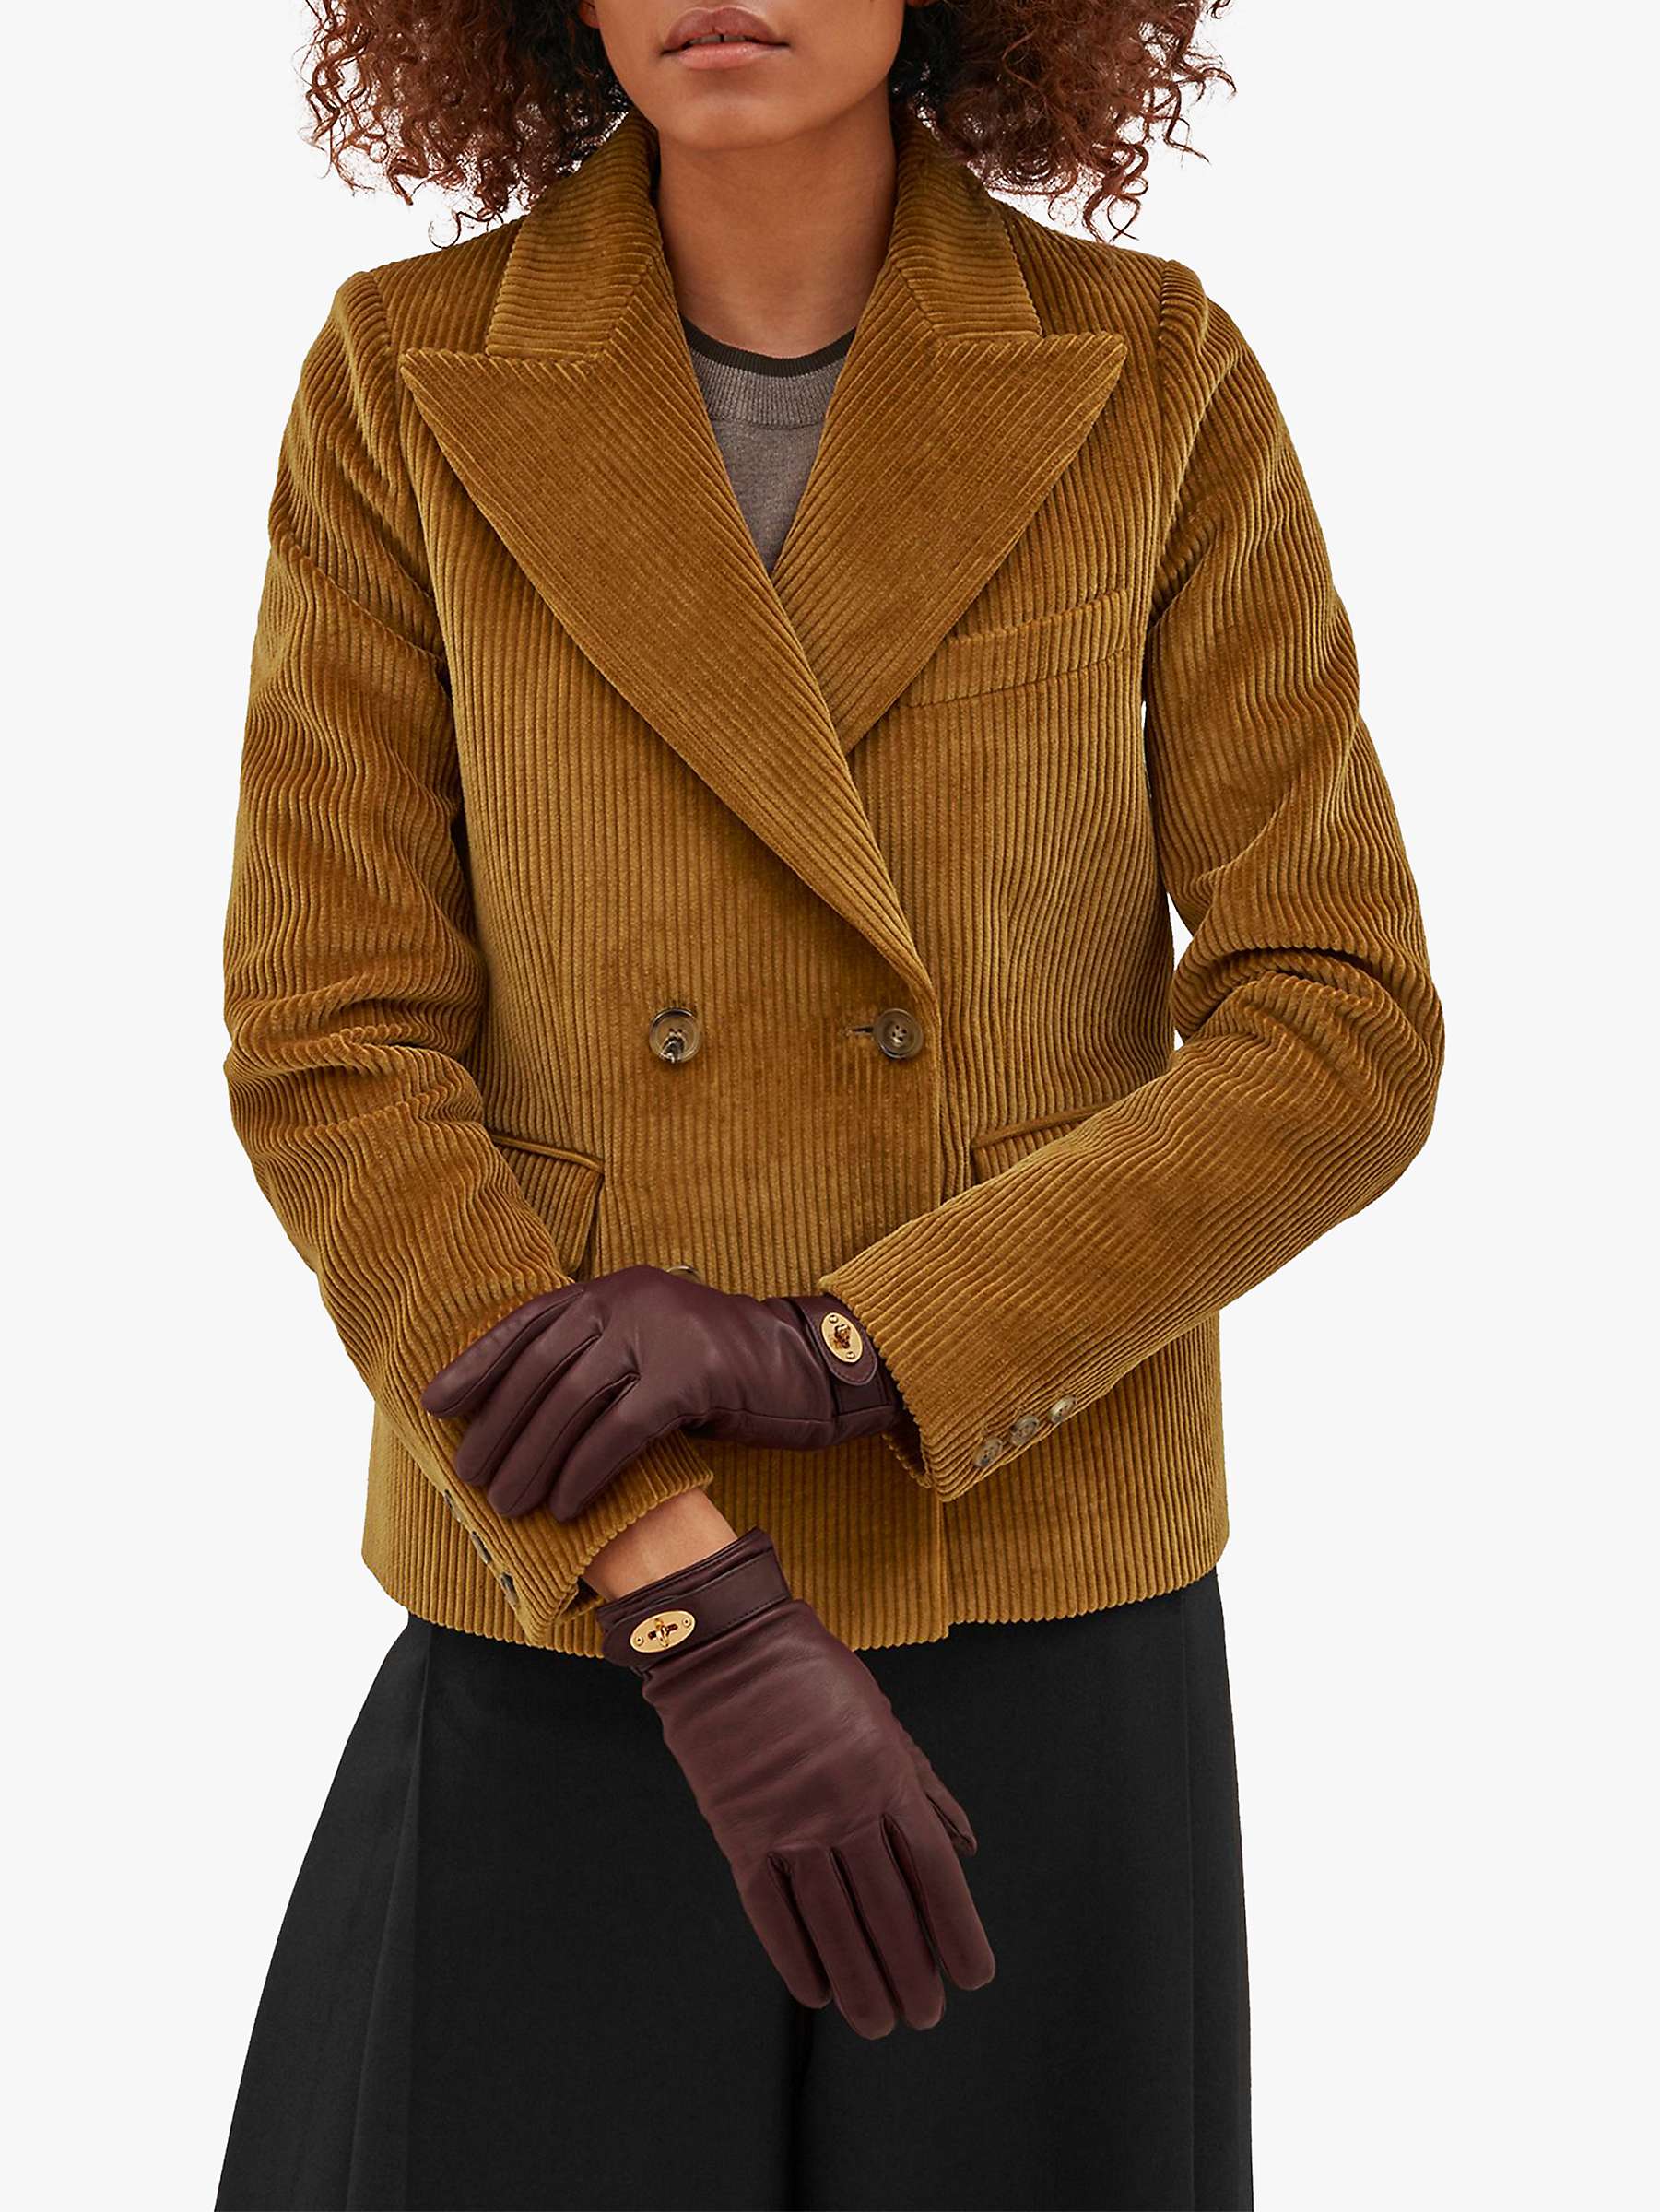 Buy Mulberry Darley Smooth Nappa Leather Gloves Online at johnlewis.com